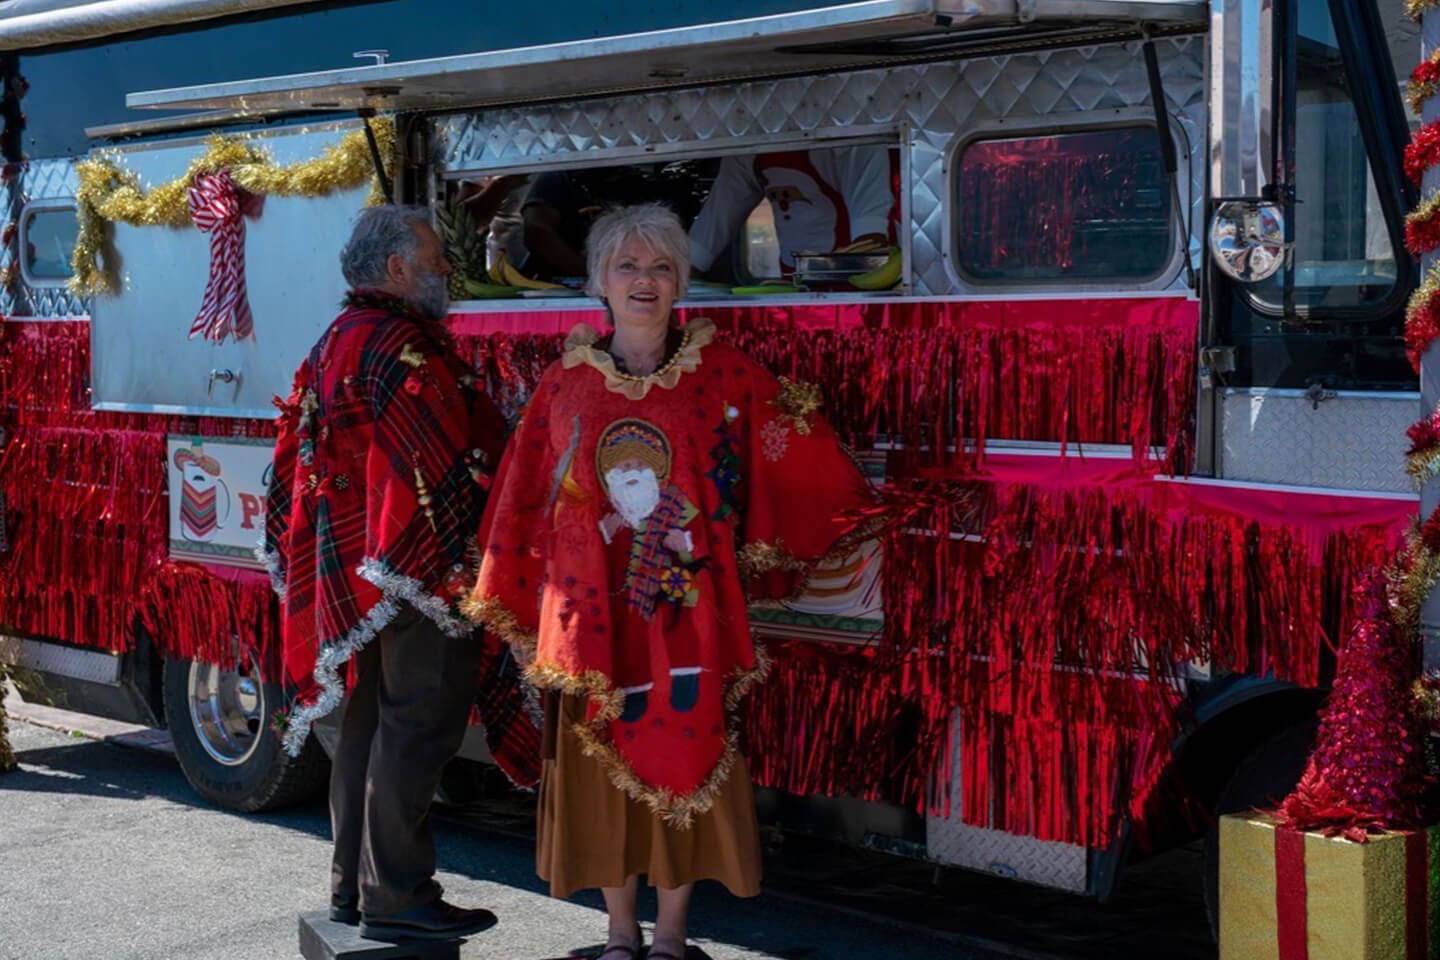 A woman in costume standing next to a red van.